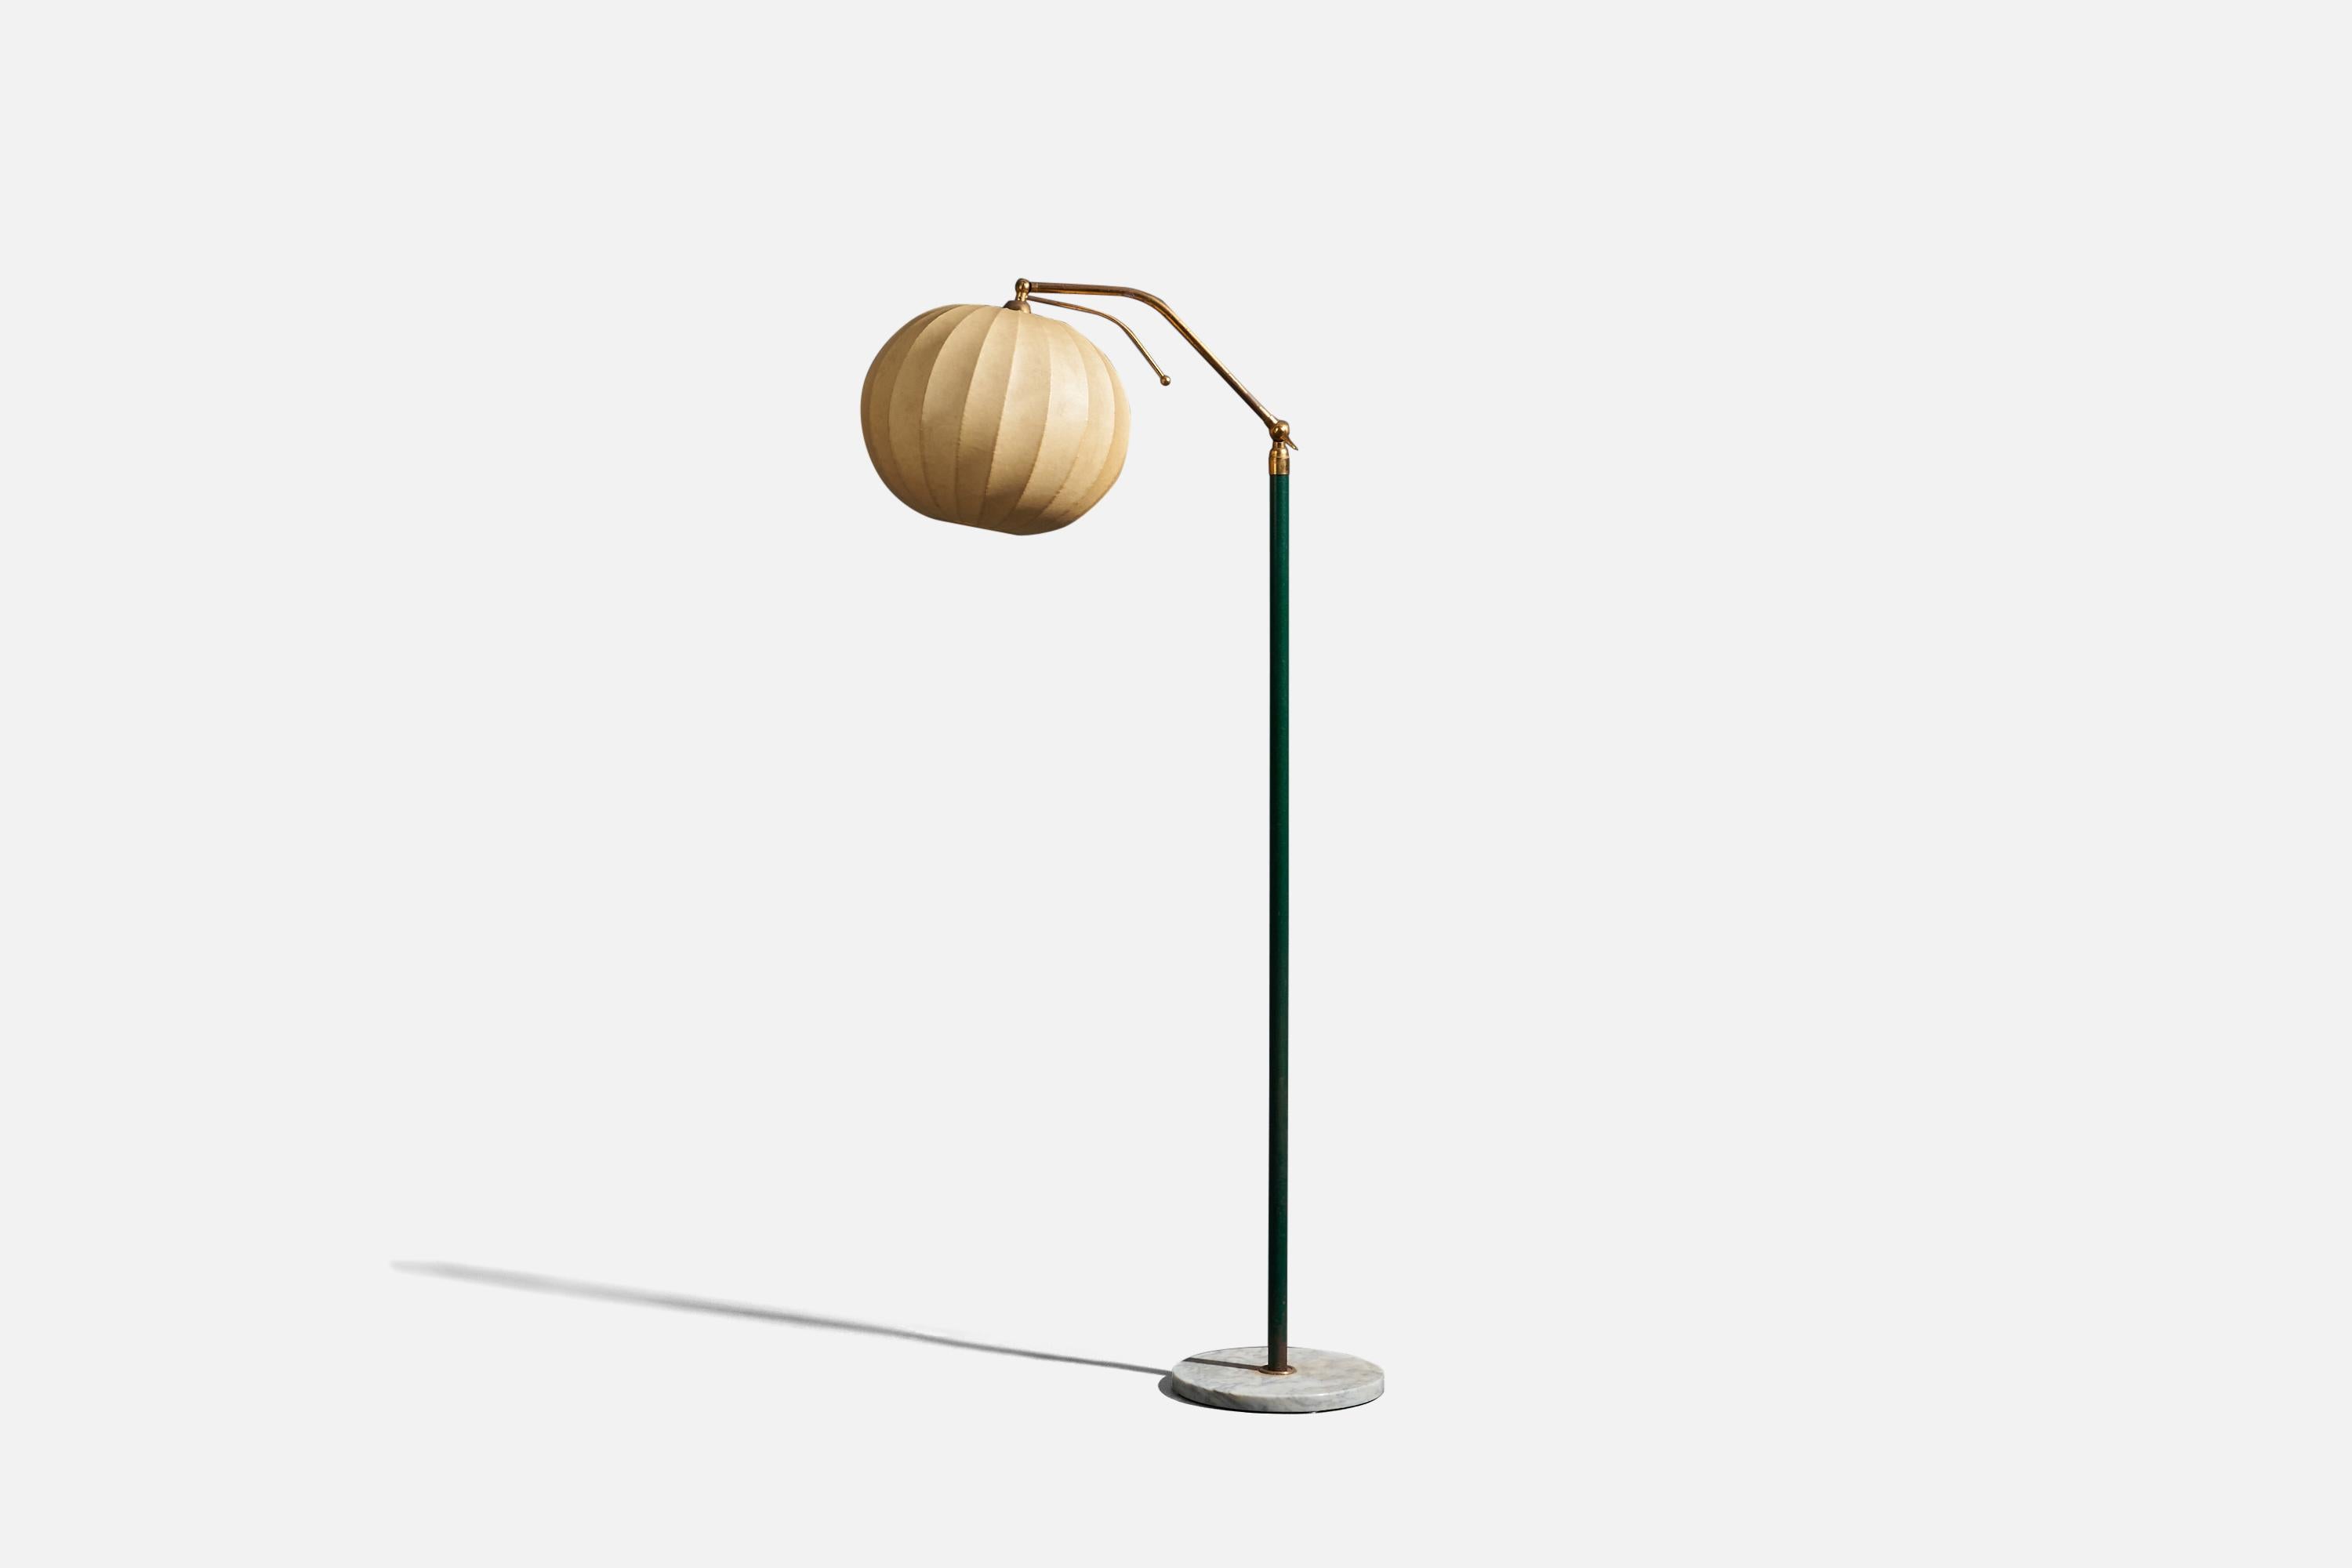 A brass, vinyl, marble and resin floor lamp designed and produced in Italy, 1950s.

Dimensions variable, measured as illustrated in first image.

Sold with Lampshade. Dimensions stated are of Floor Lamp with Lampshade.

Socket takes standard